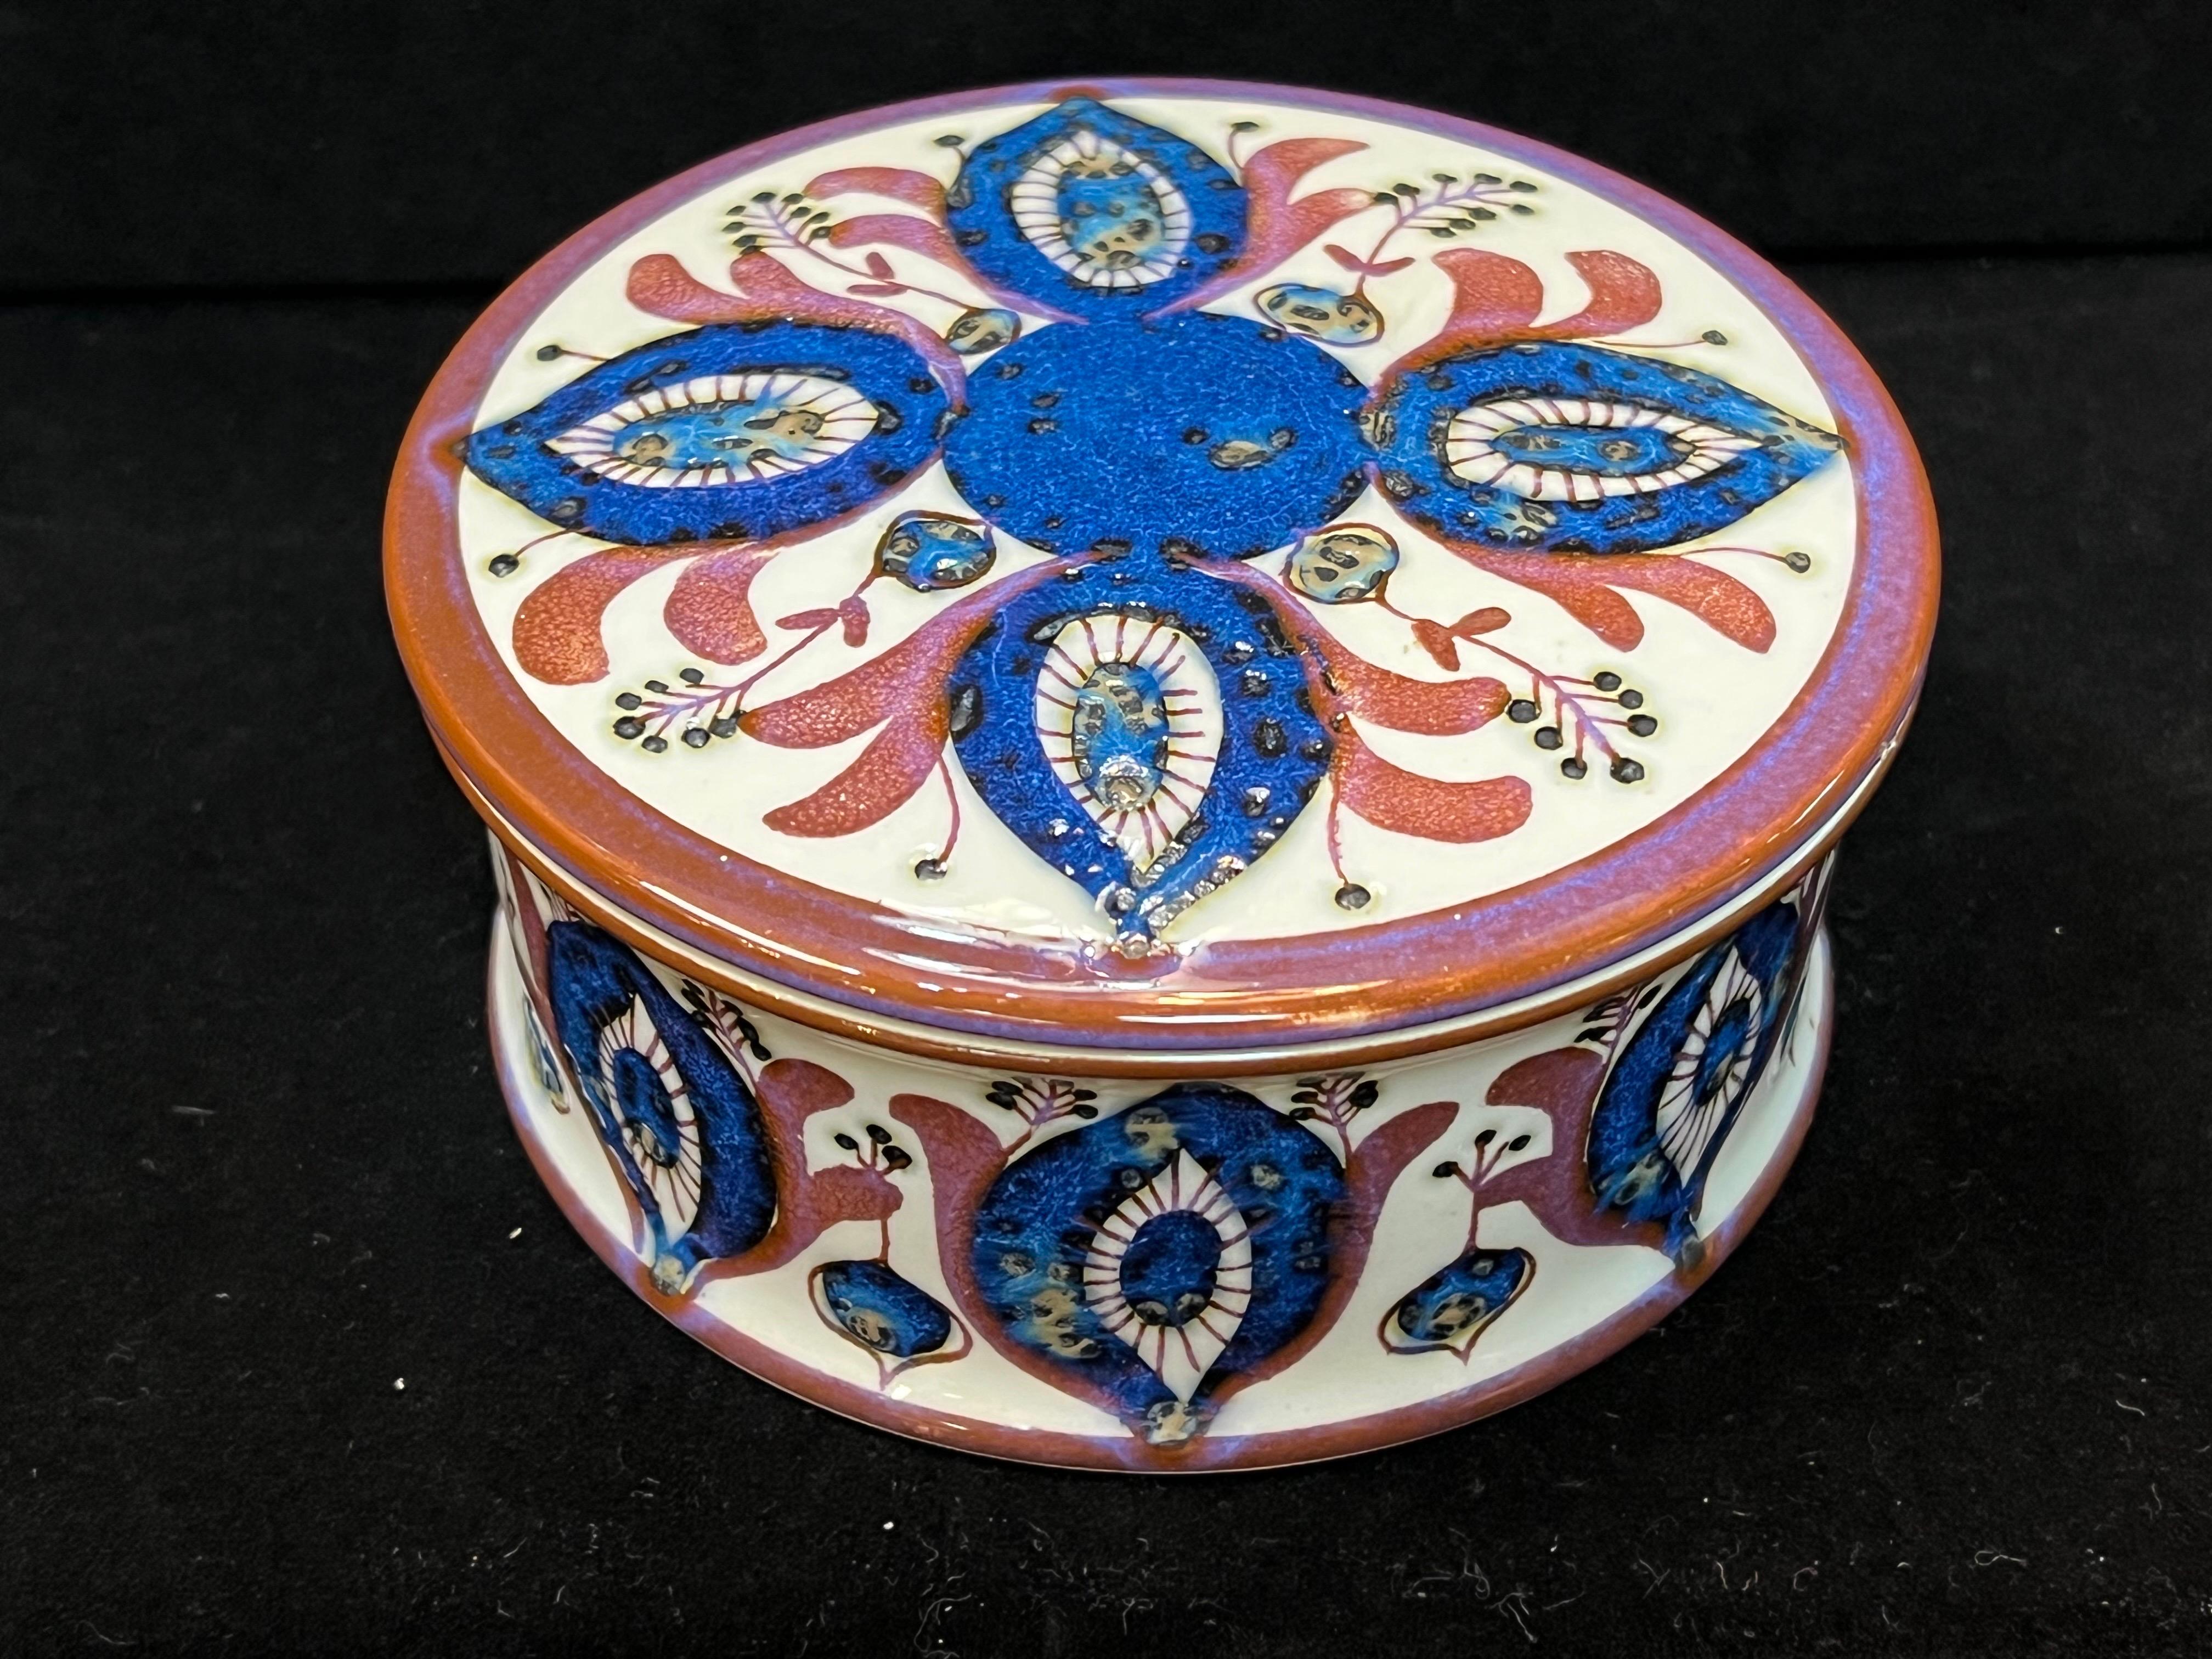 A vintage circa 1970s midcentury Danish modern faience ceramic box by Berte Jessen for Royal Copenhagen. This lidded circular box is fully marked and has a beautiful and colorful design. The lidded pot is decorated with stylized seed pod designs.